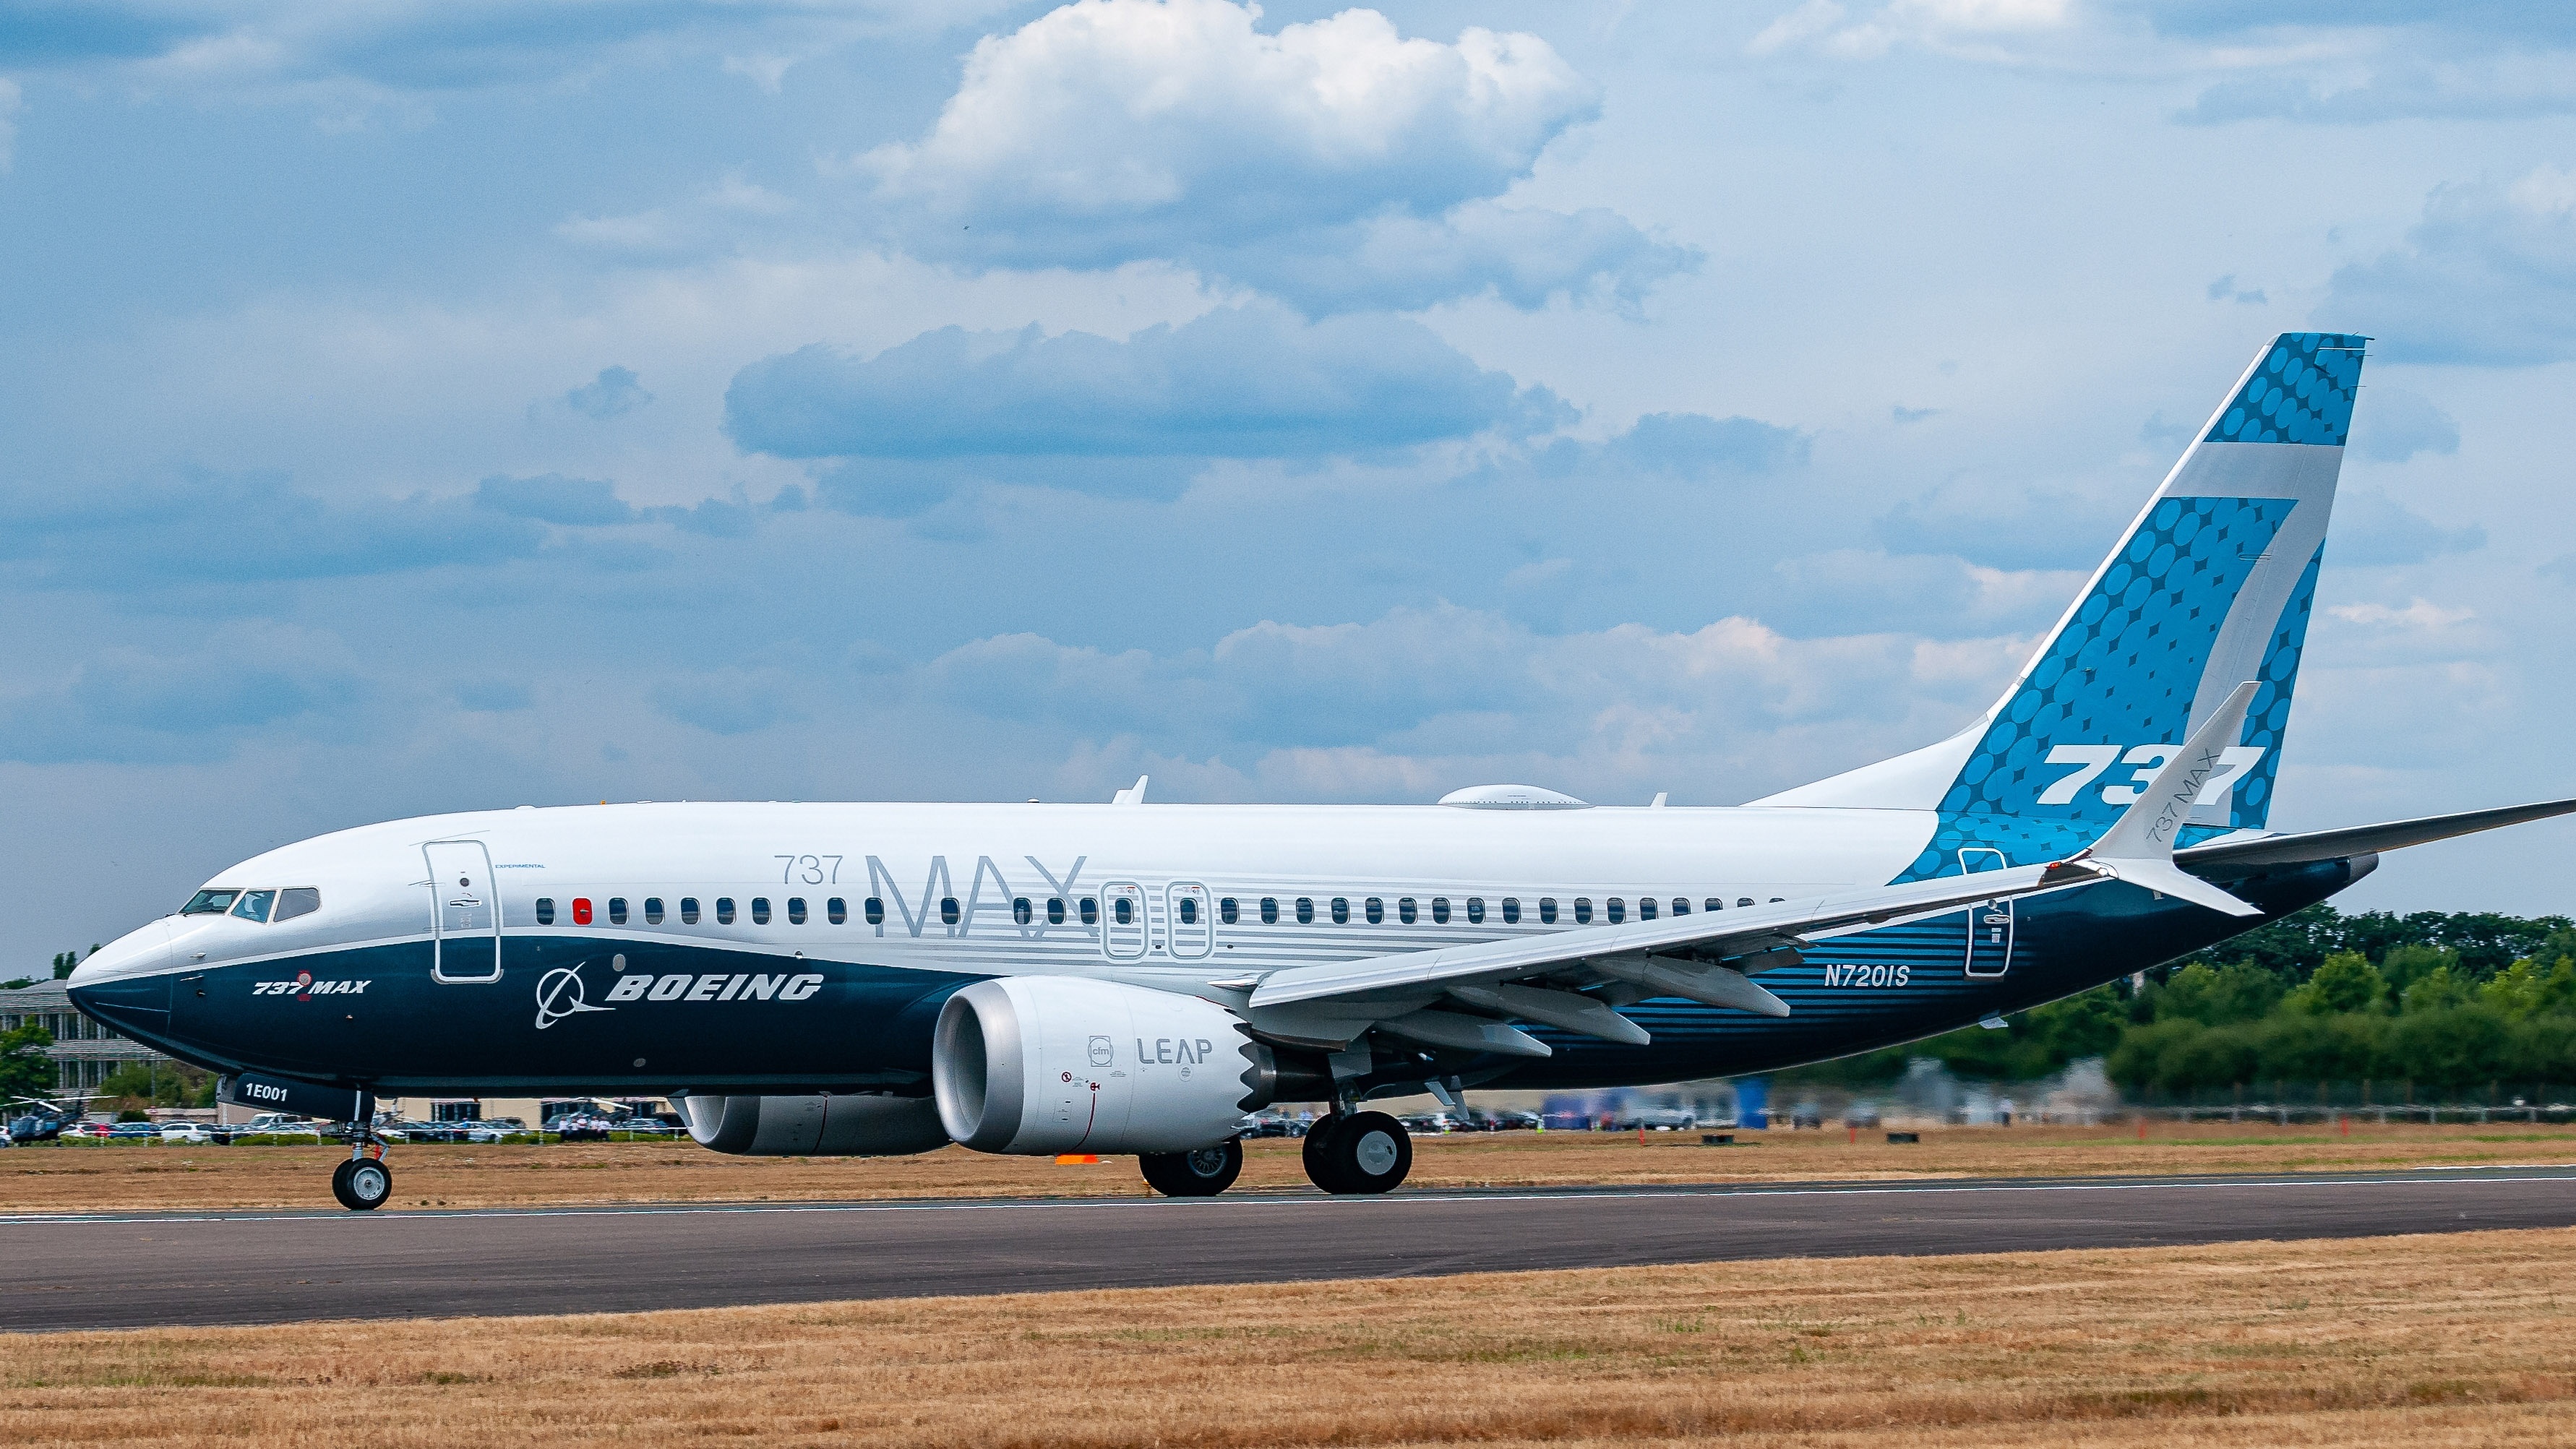 Issues with the 737 MAX have raised questions about Boeing’s design and safety protocols. Photo: Shutterstock